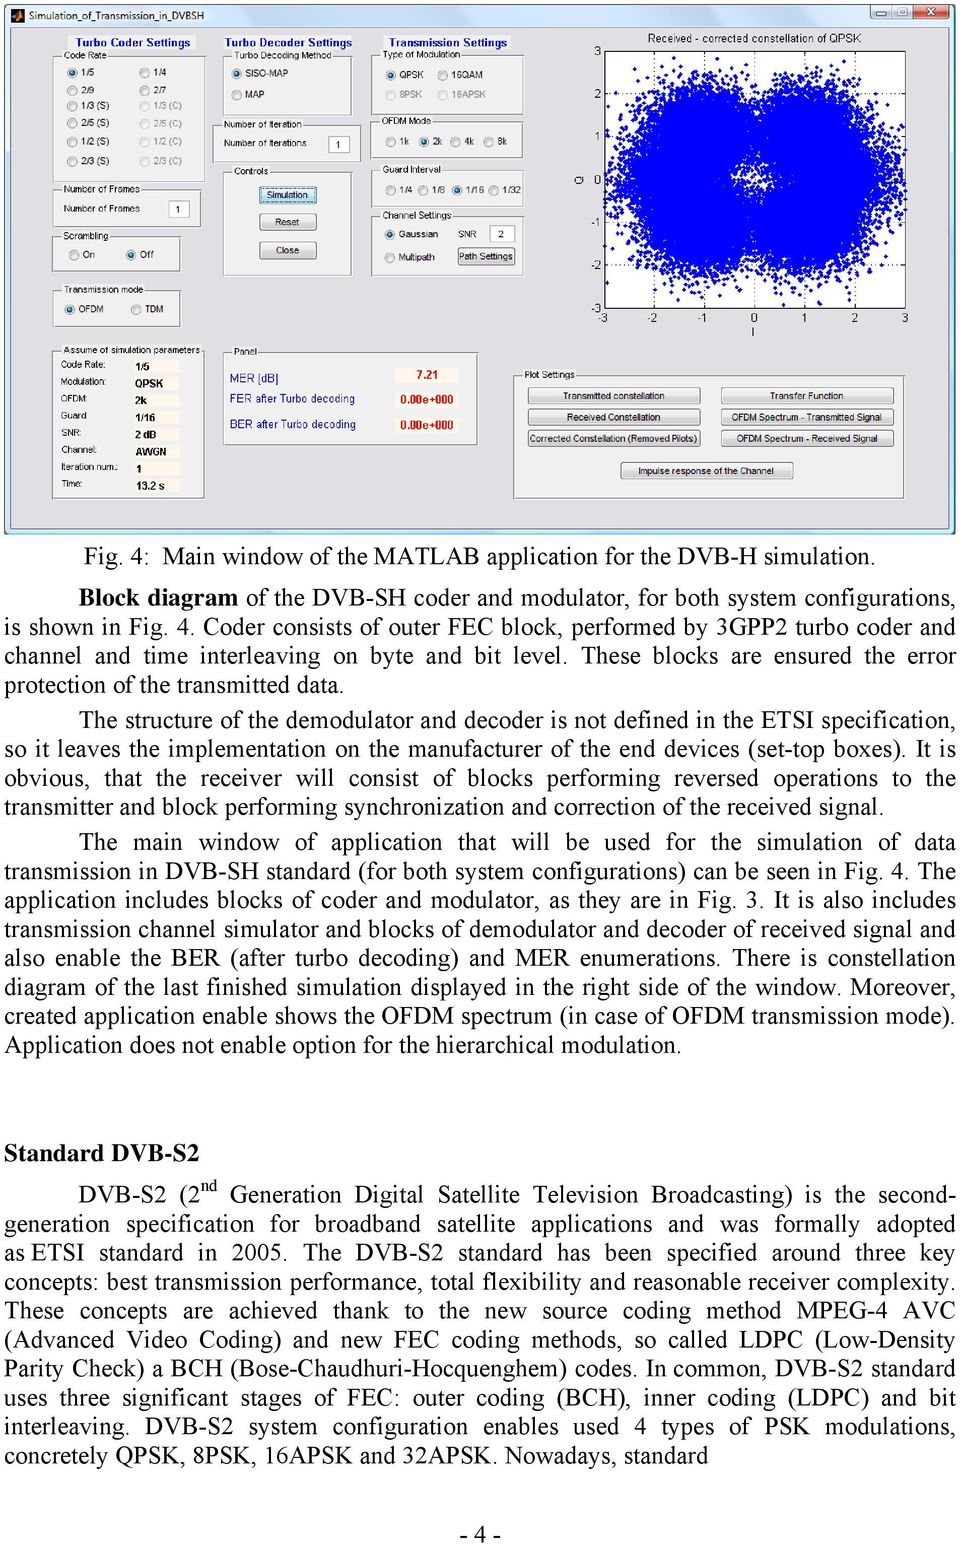 The structure of the demodulator and decoder is not defined in the ETSI specification, so it leaves the implementation on the manufacturer of the end devices (set-top boxes).